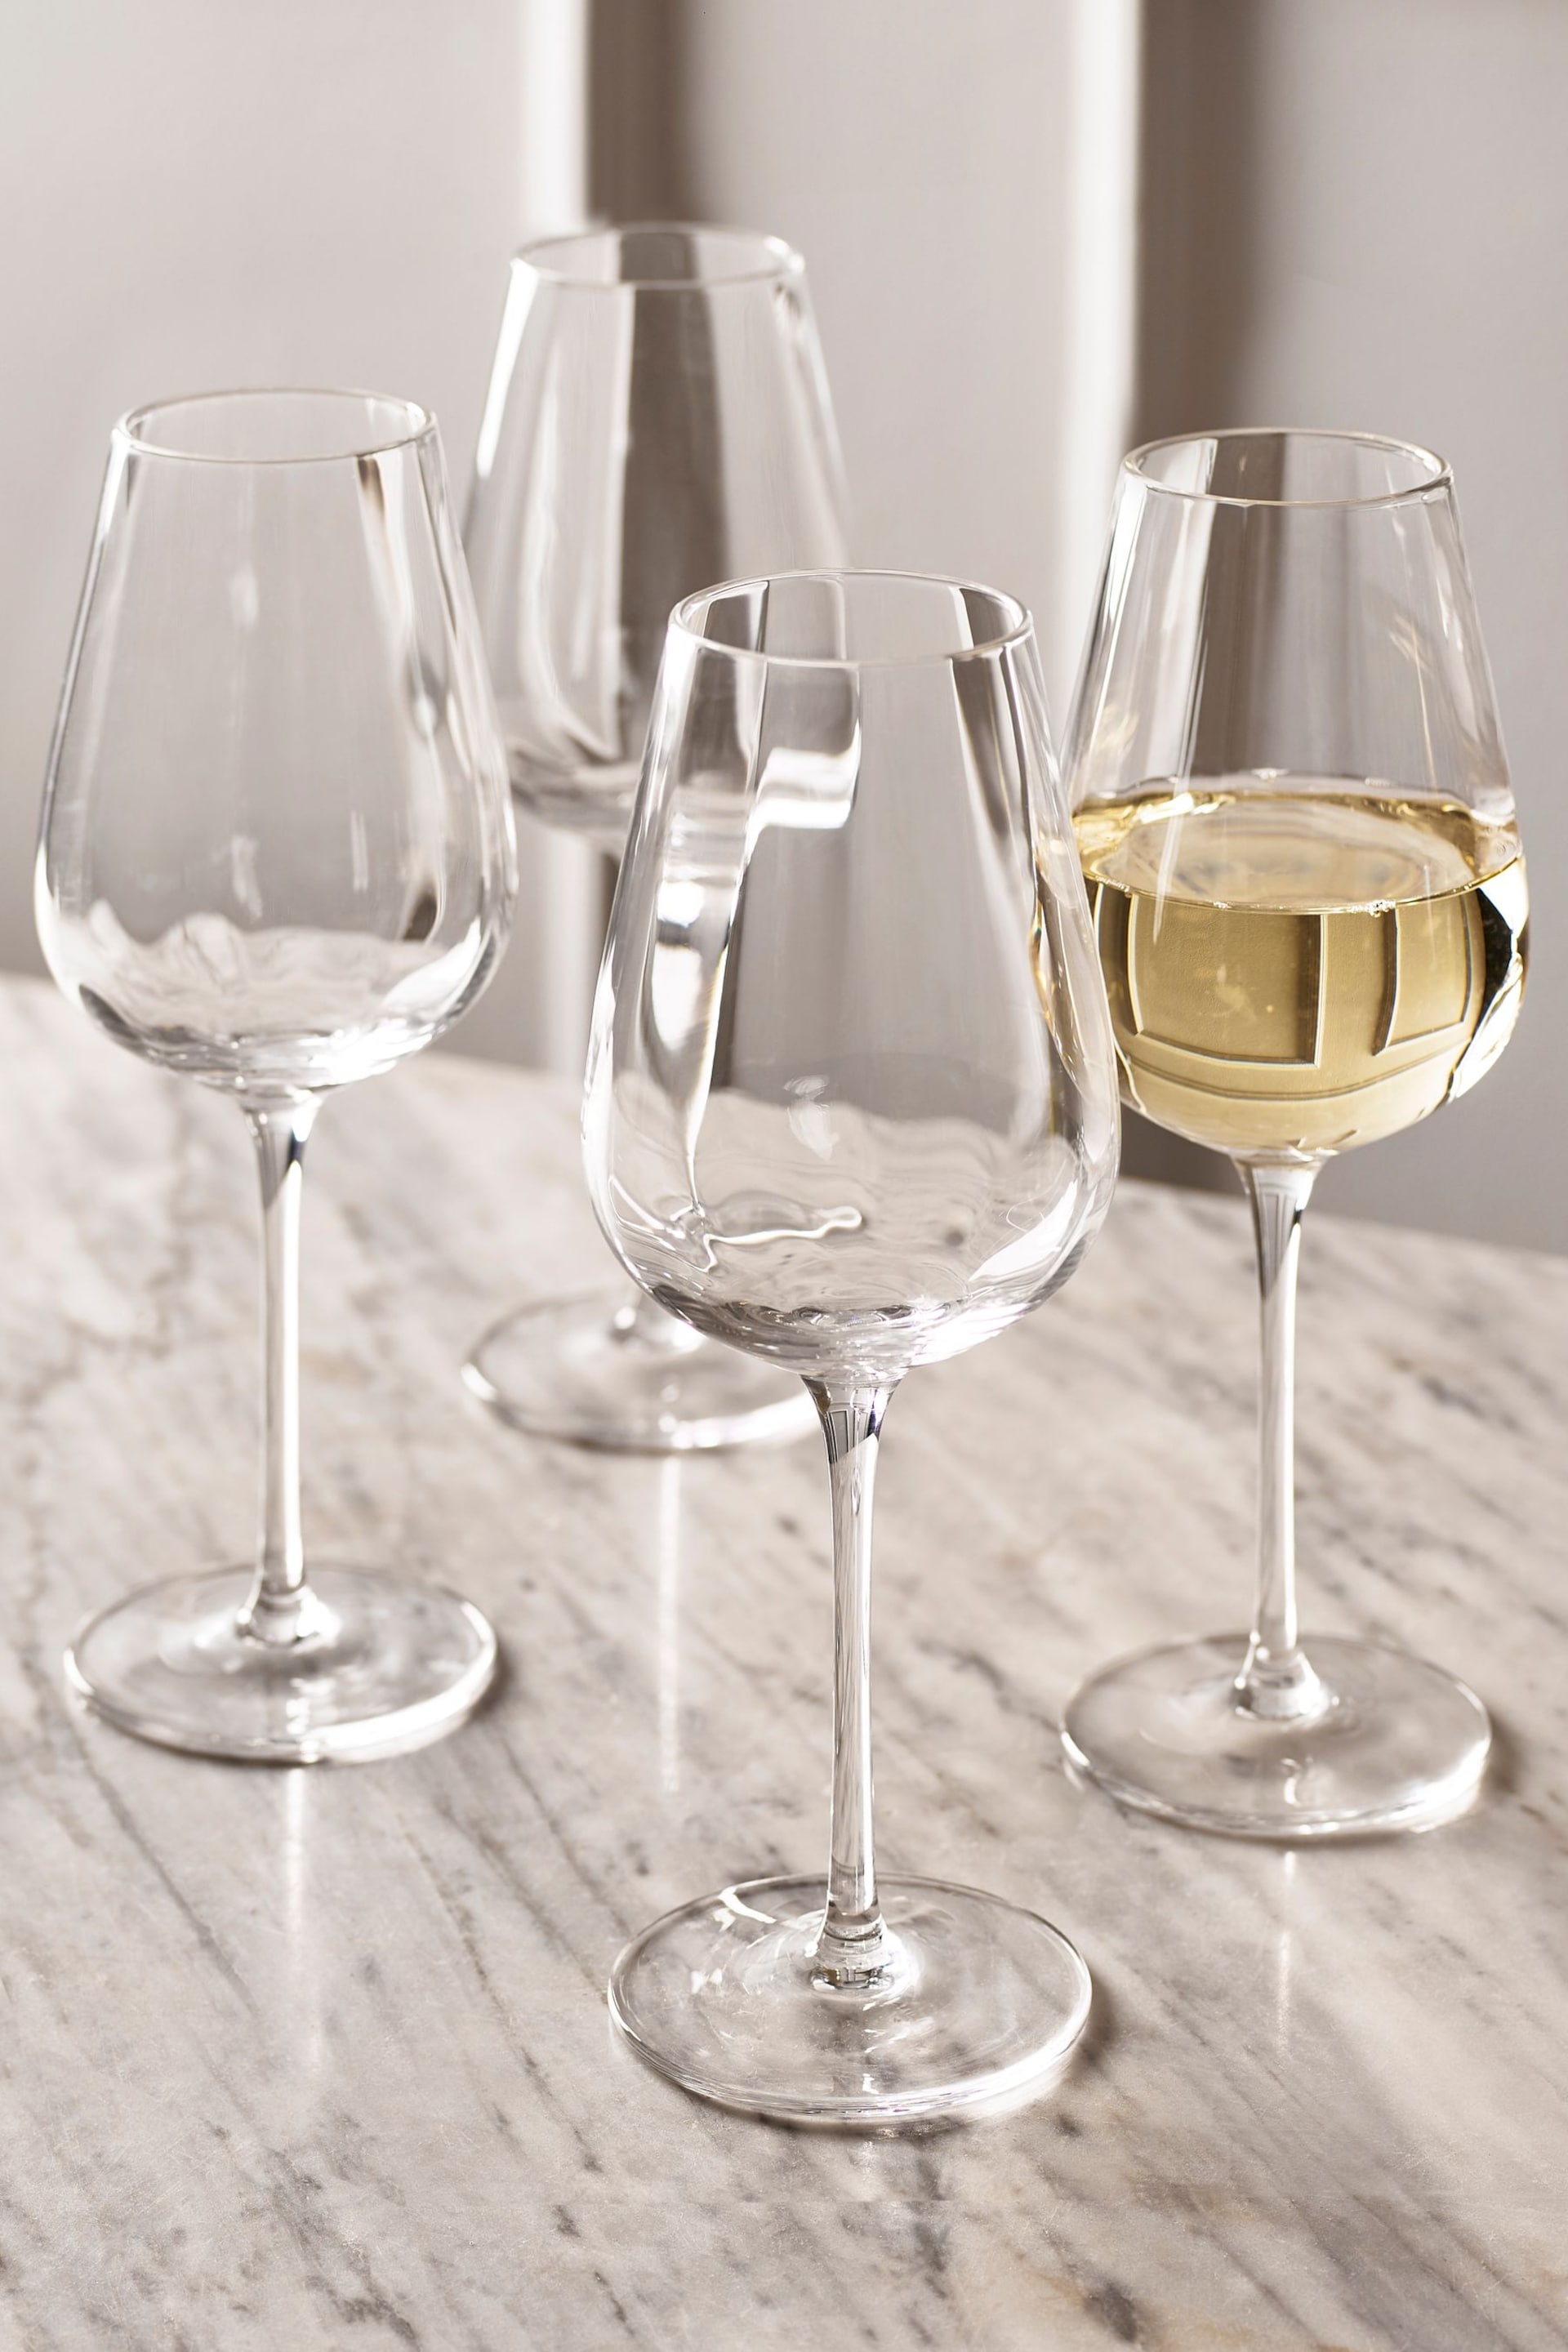 Set of 4 Clear Kya Wine Glasses - Image 1 of 6